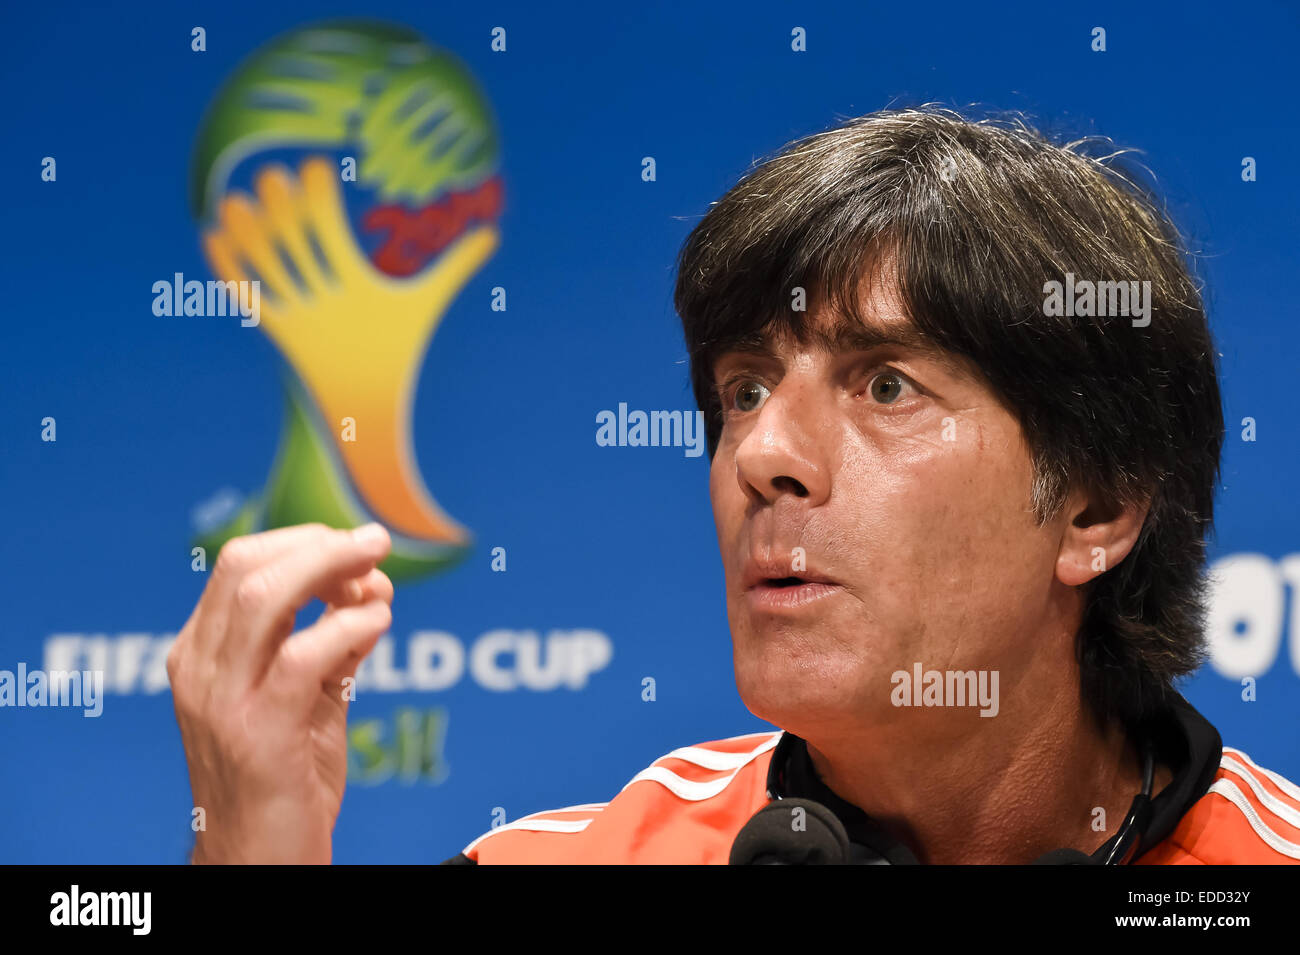 Head coach of Germany Joachim Loew answers to the media during a press conference on the eve of the 2014 FIFA World Cup Brazil Quarter Final match between France and Germany at Estadio Maracana  Featuring: Joachim Loew Where: Rio De Janeiro, Brazil When: Stock Photo